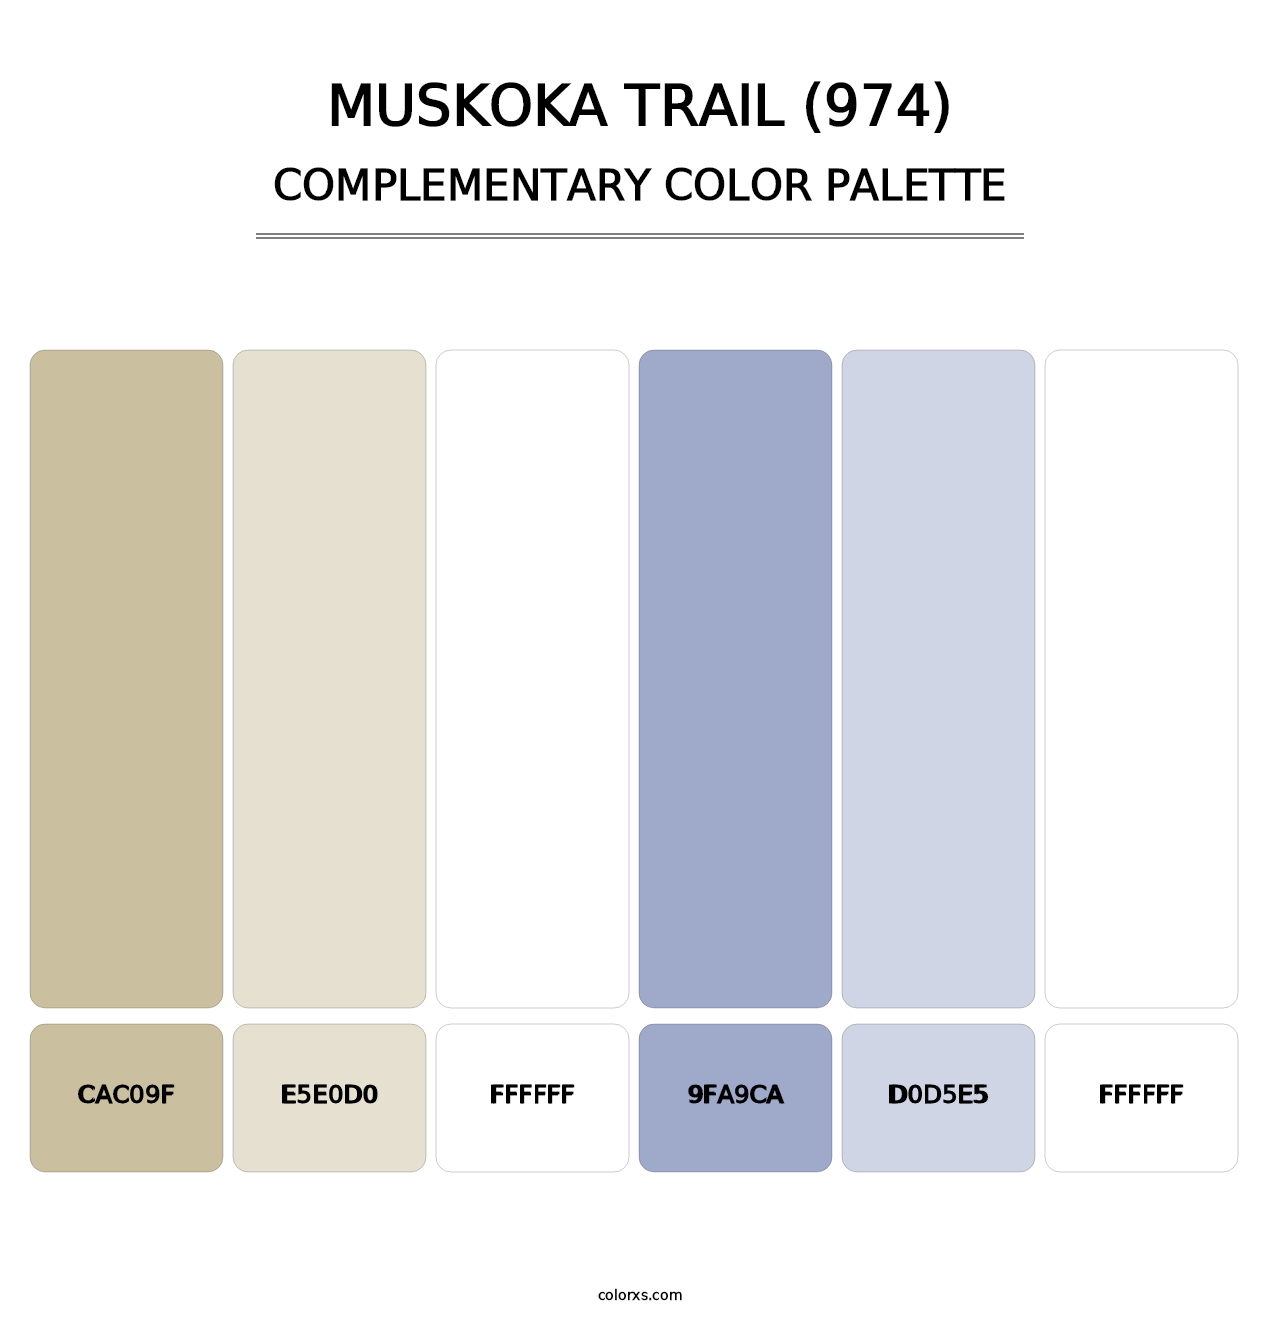 Muskoka Trail (974) - Complementary Color Palette